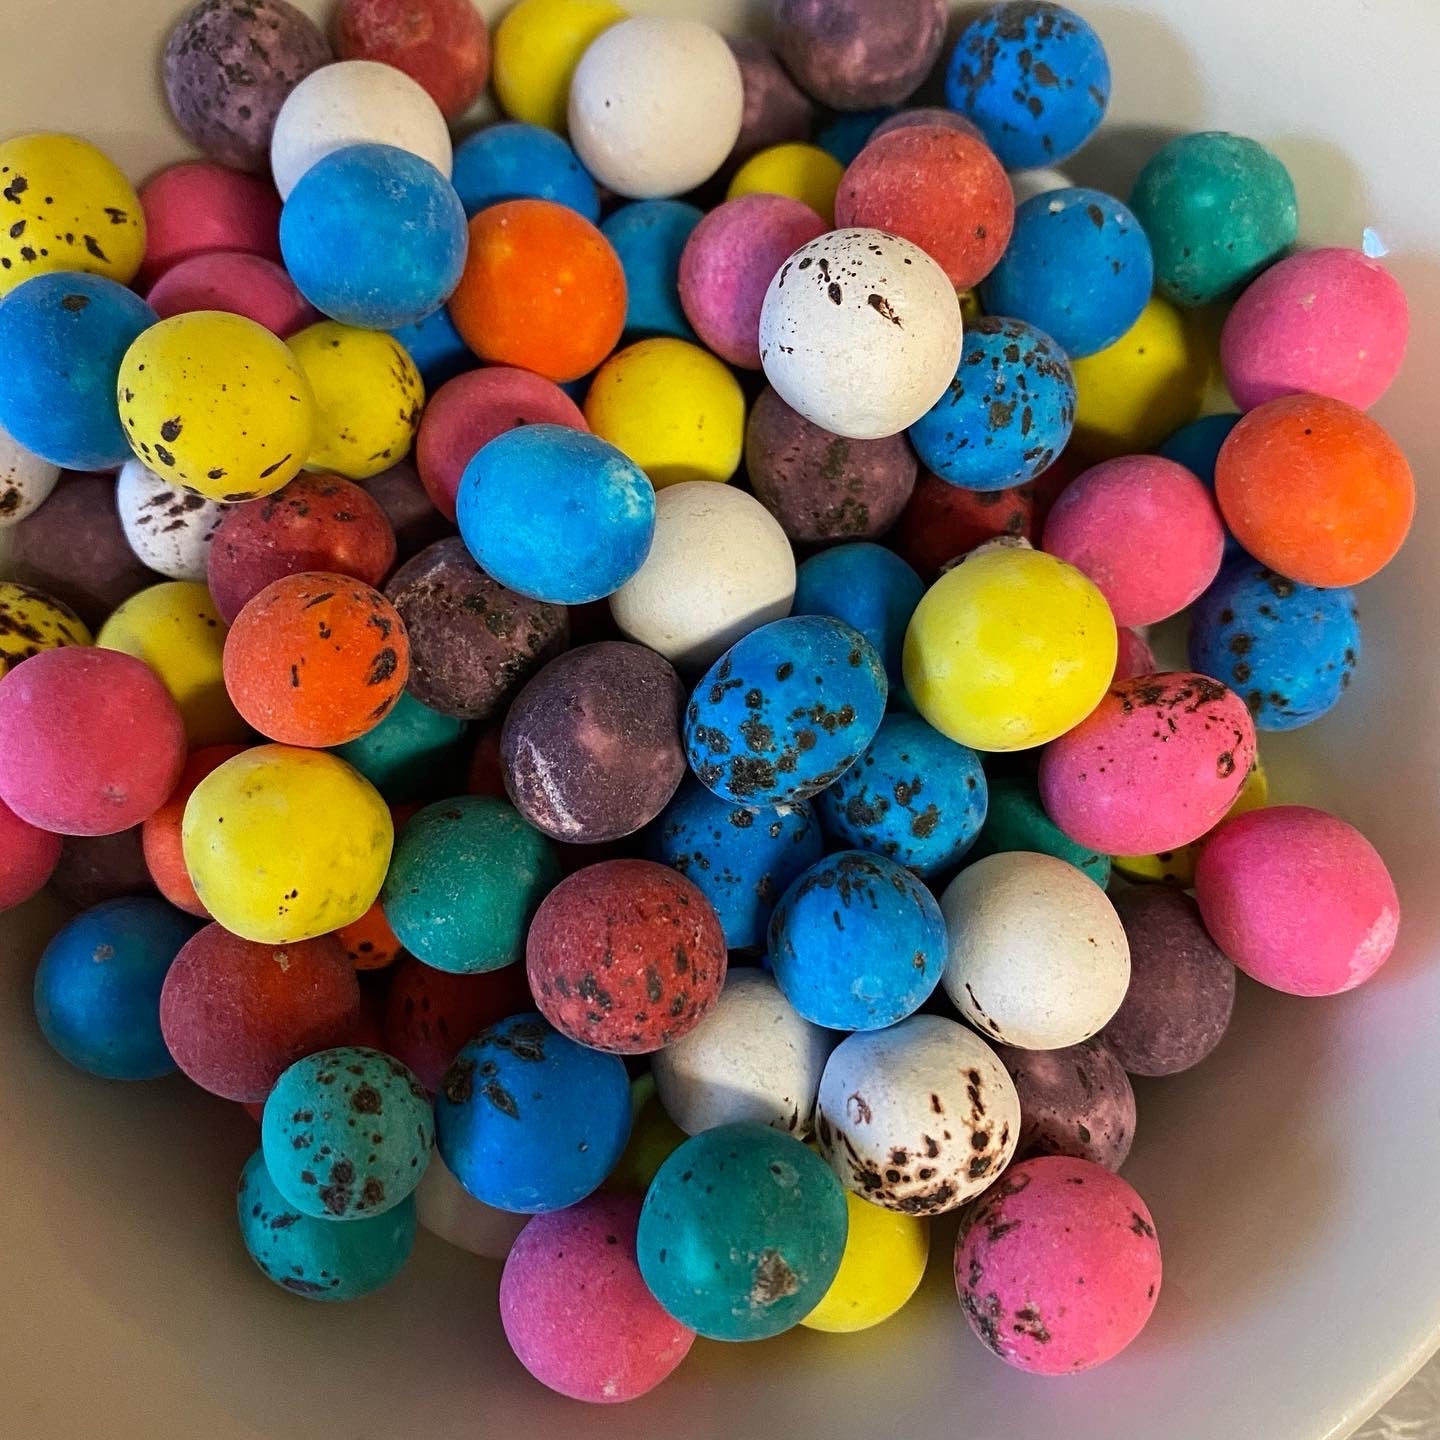 Speckled Eggs (1kg) - The Deli